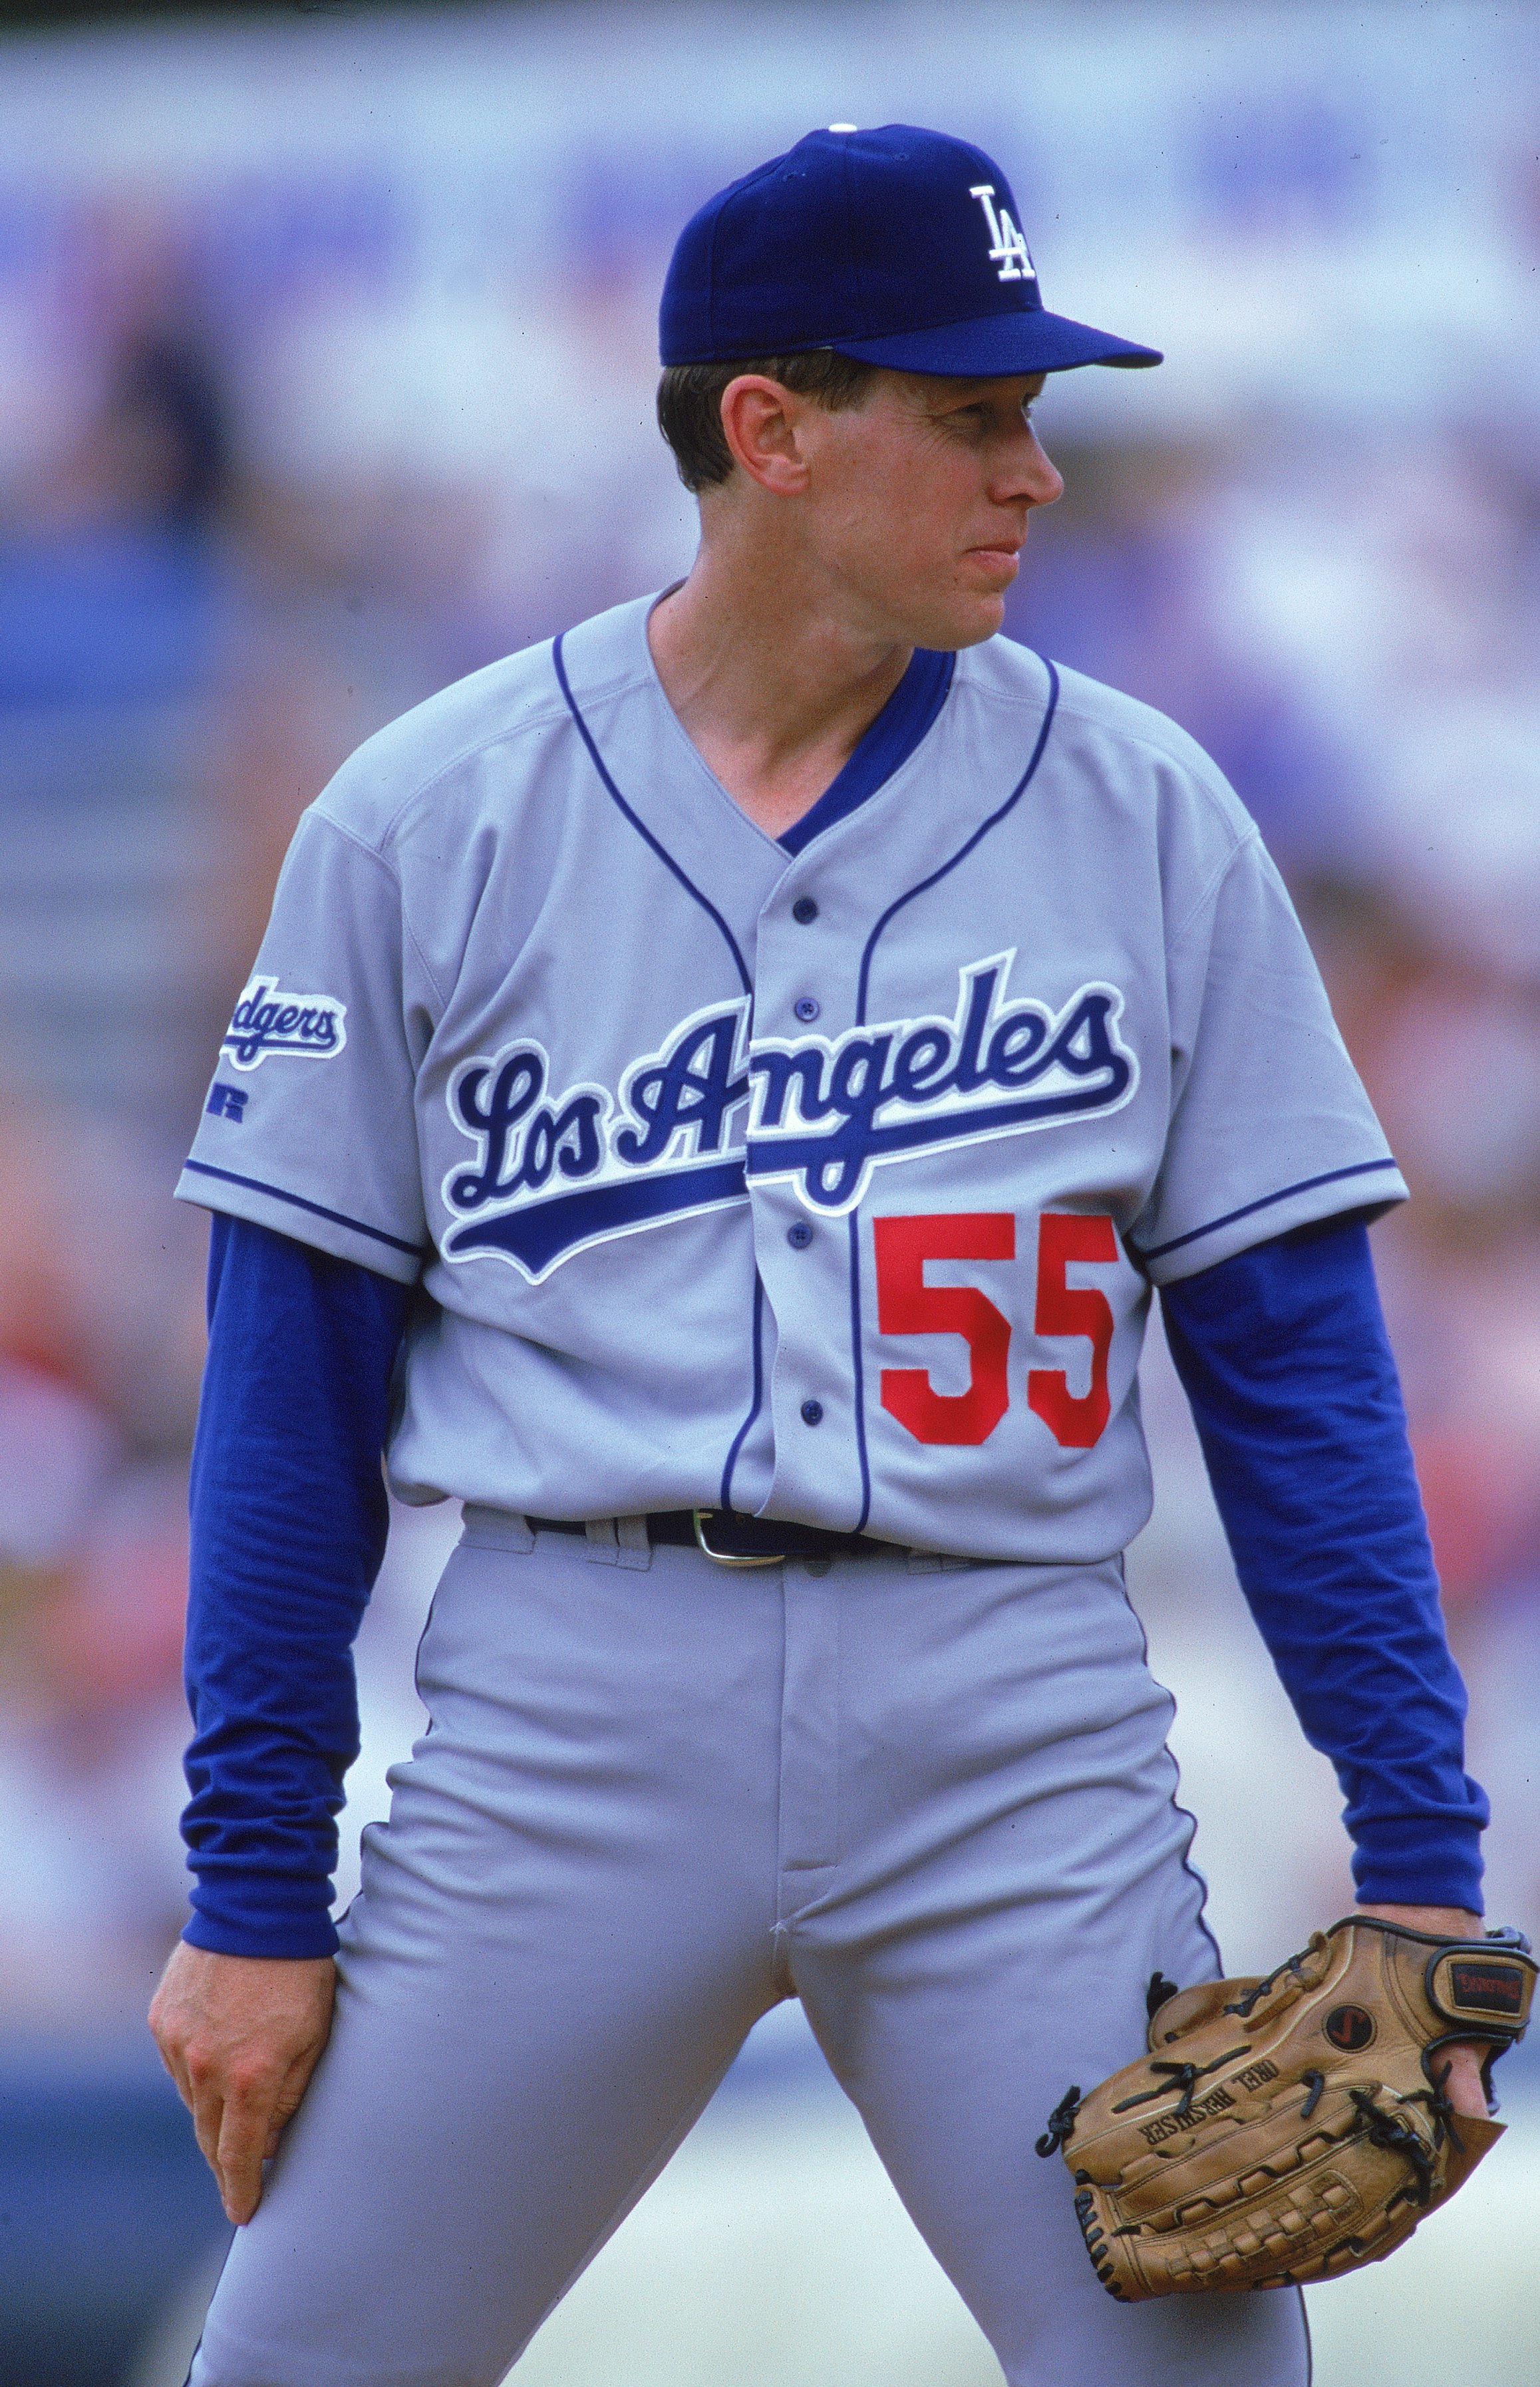 4 Mar 2000: Orel Hershiser #55 of the Los Angeles Dodgers waits to pitch the ball during the Spring Training Game against the New York Mets in Port St. Lucie, Florida. The Mets defeated the Dodgers 7-3.